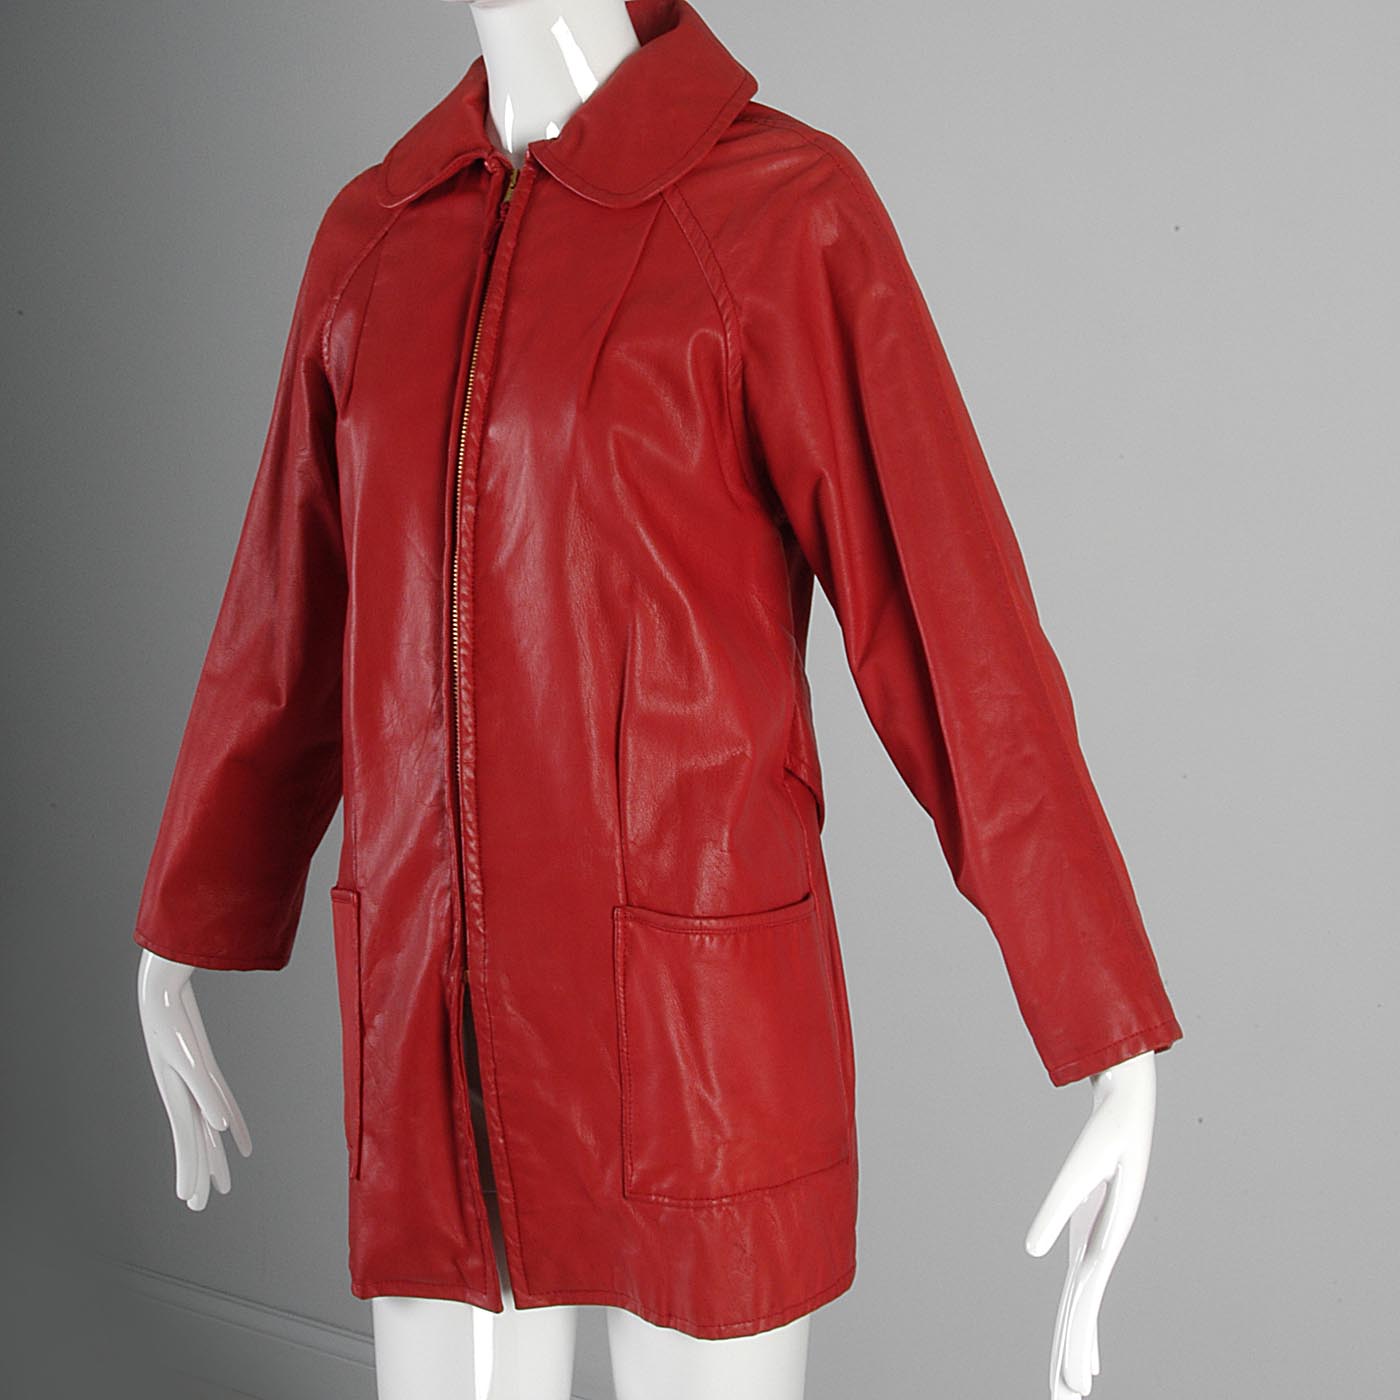 1960s Bright Lipstick Red Leather Jacket